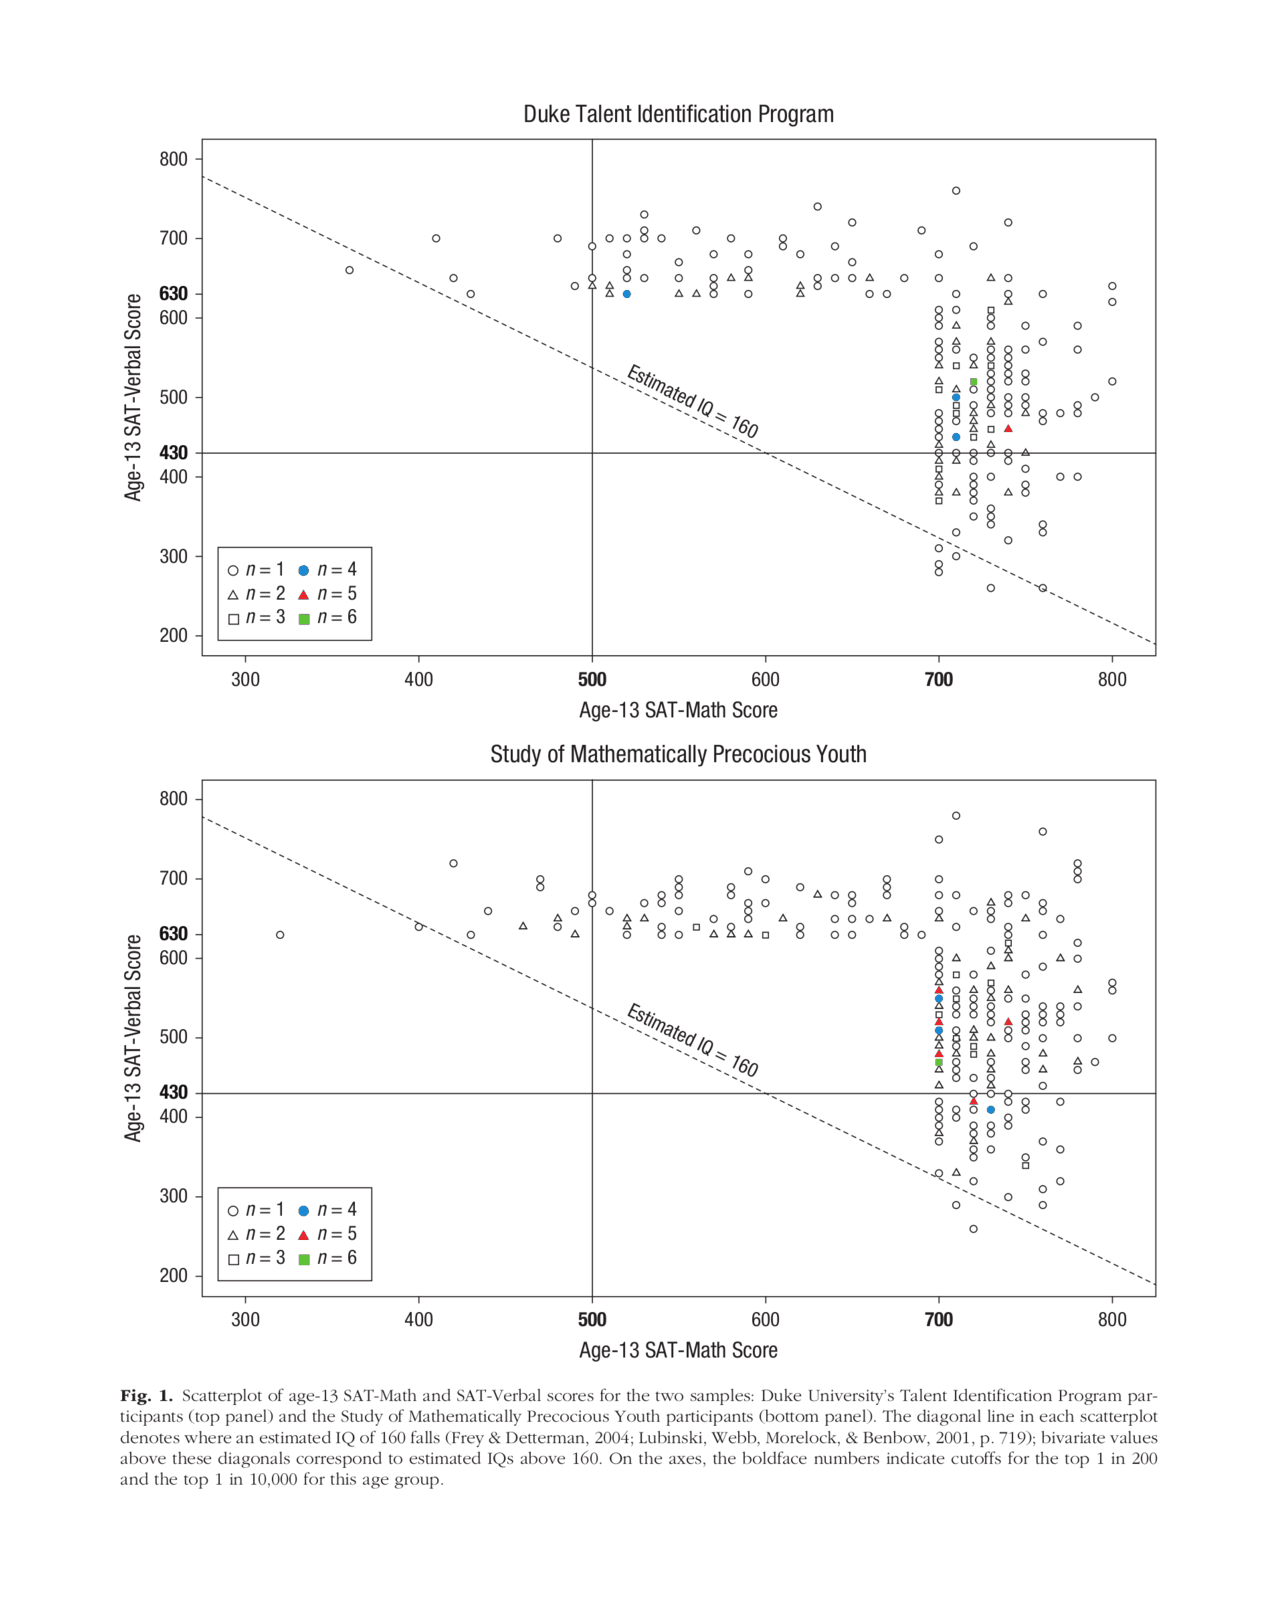 Fig. 1. Scatterplot of age-13 SAT-Math and SAT-Verbal scores for the two samples: Duke University’s Talent Identification Program participants (top panel) and the Study of Mathematically Precocious Youth participants (bottom panel). The diagonal line in each scatterplot denotes where an estimated IQ of 160 falls (Frey & Detterman, 2004; Lubinski, Webb, Morelock, & Benbow, 2001, p. 719); bivariate values above these diagonals correspond to estimated IQs above 160. On the axes, the boldface numbers indicate cutoffs for the top 1 in 200 and the top 1 in 10,000 for this age group.